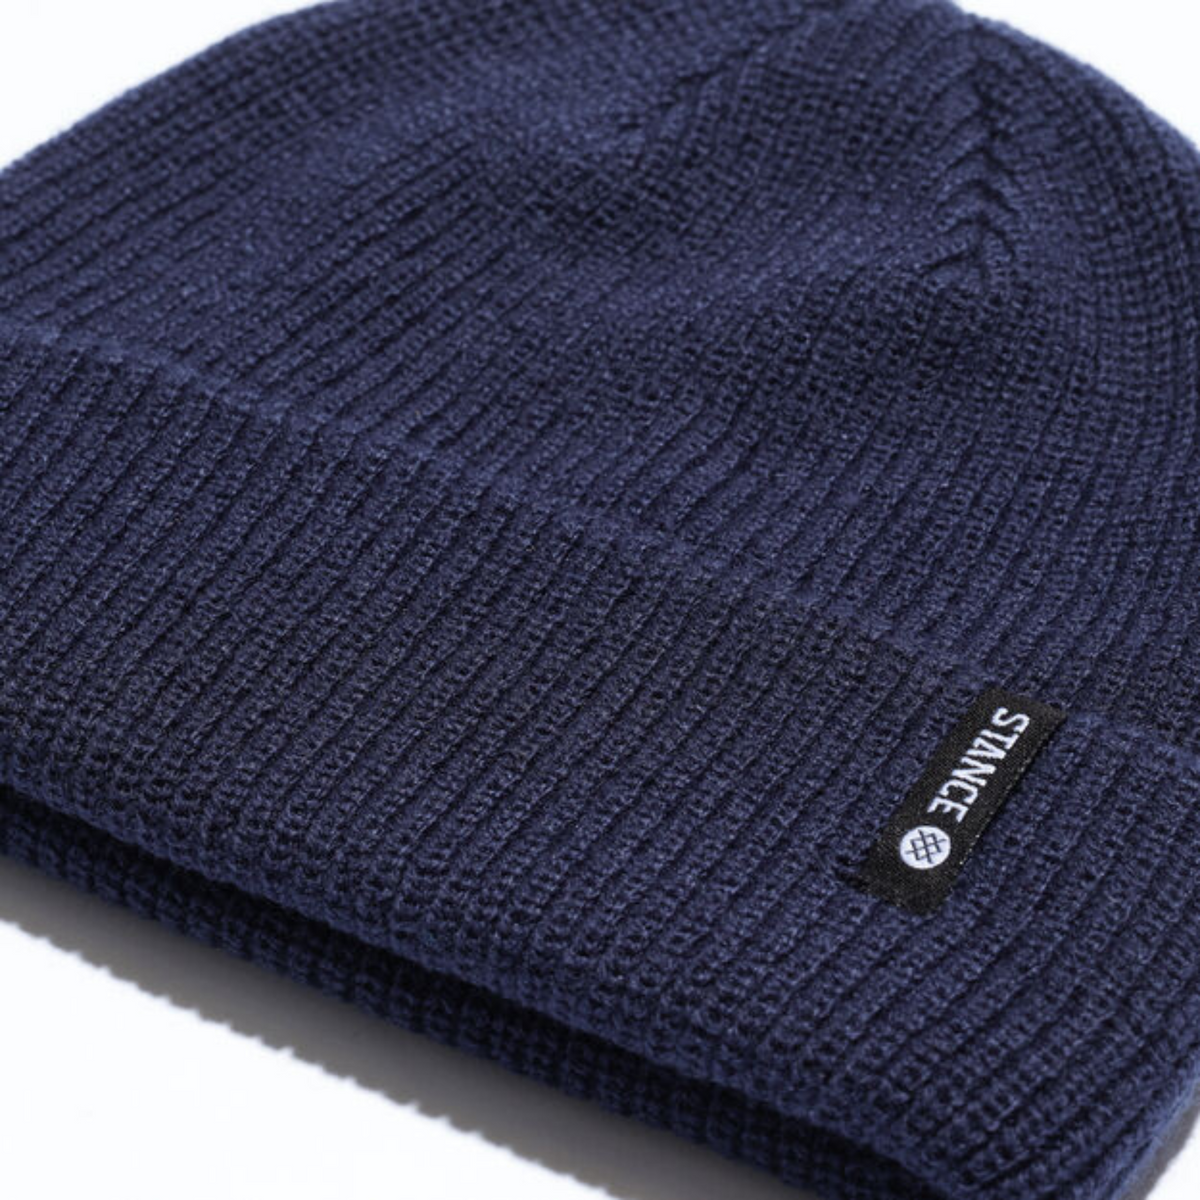 Stance Icon 2 Beanie in navy blue close-up display